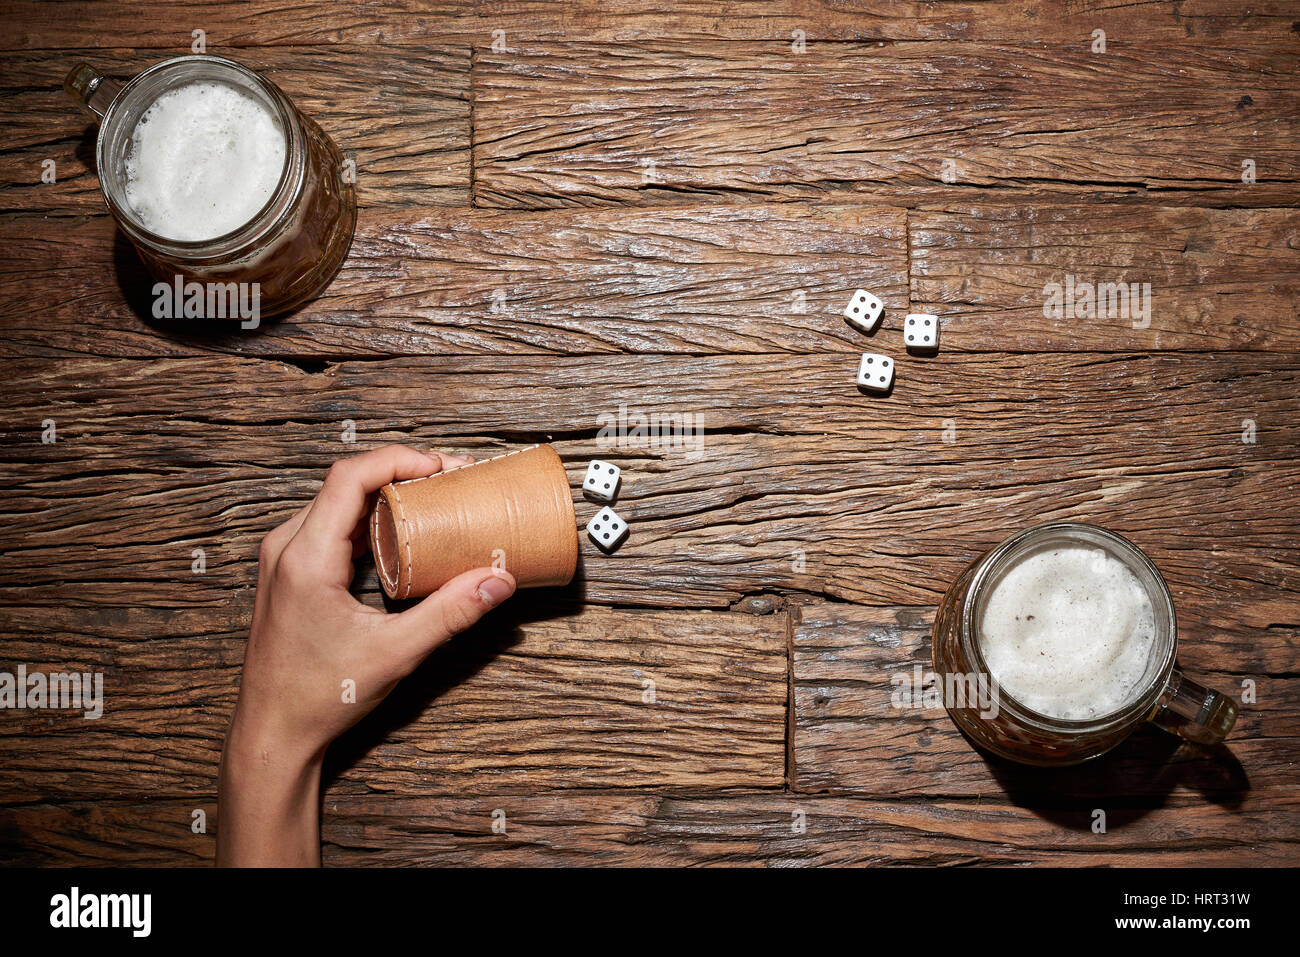 Playing dice game on an old wooden table with beer mug Stock Photo